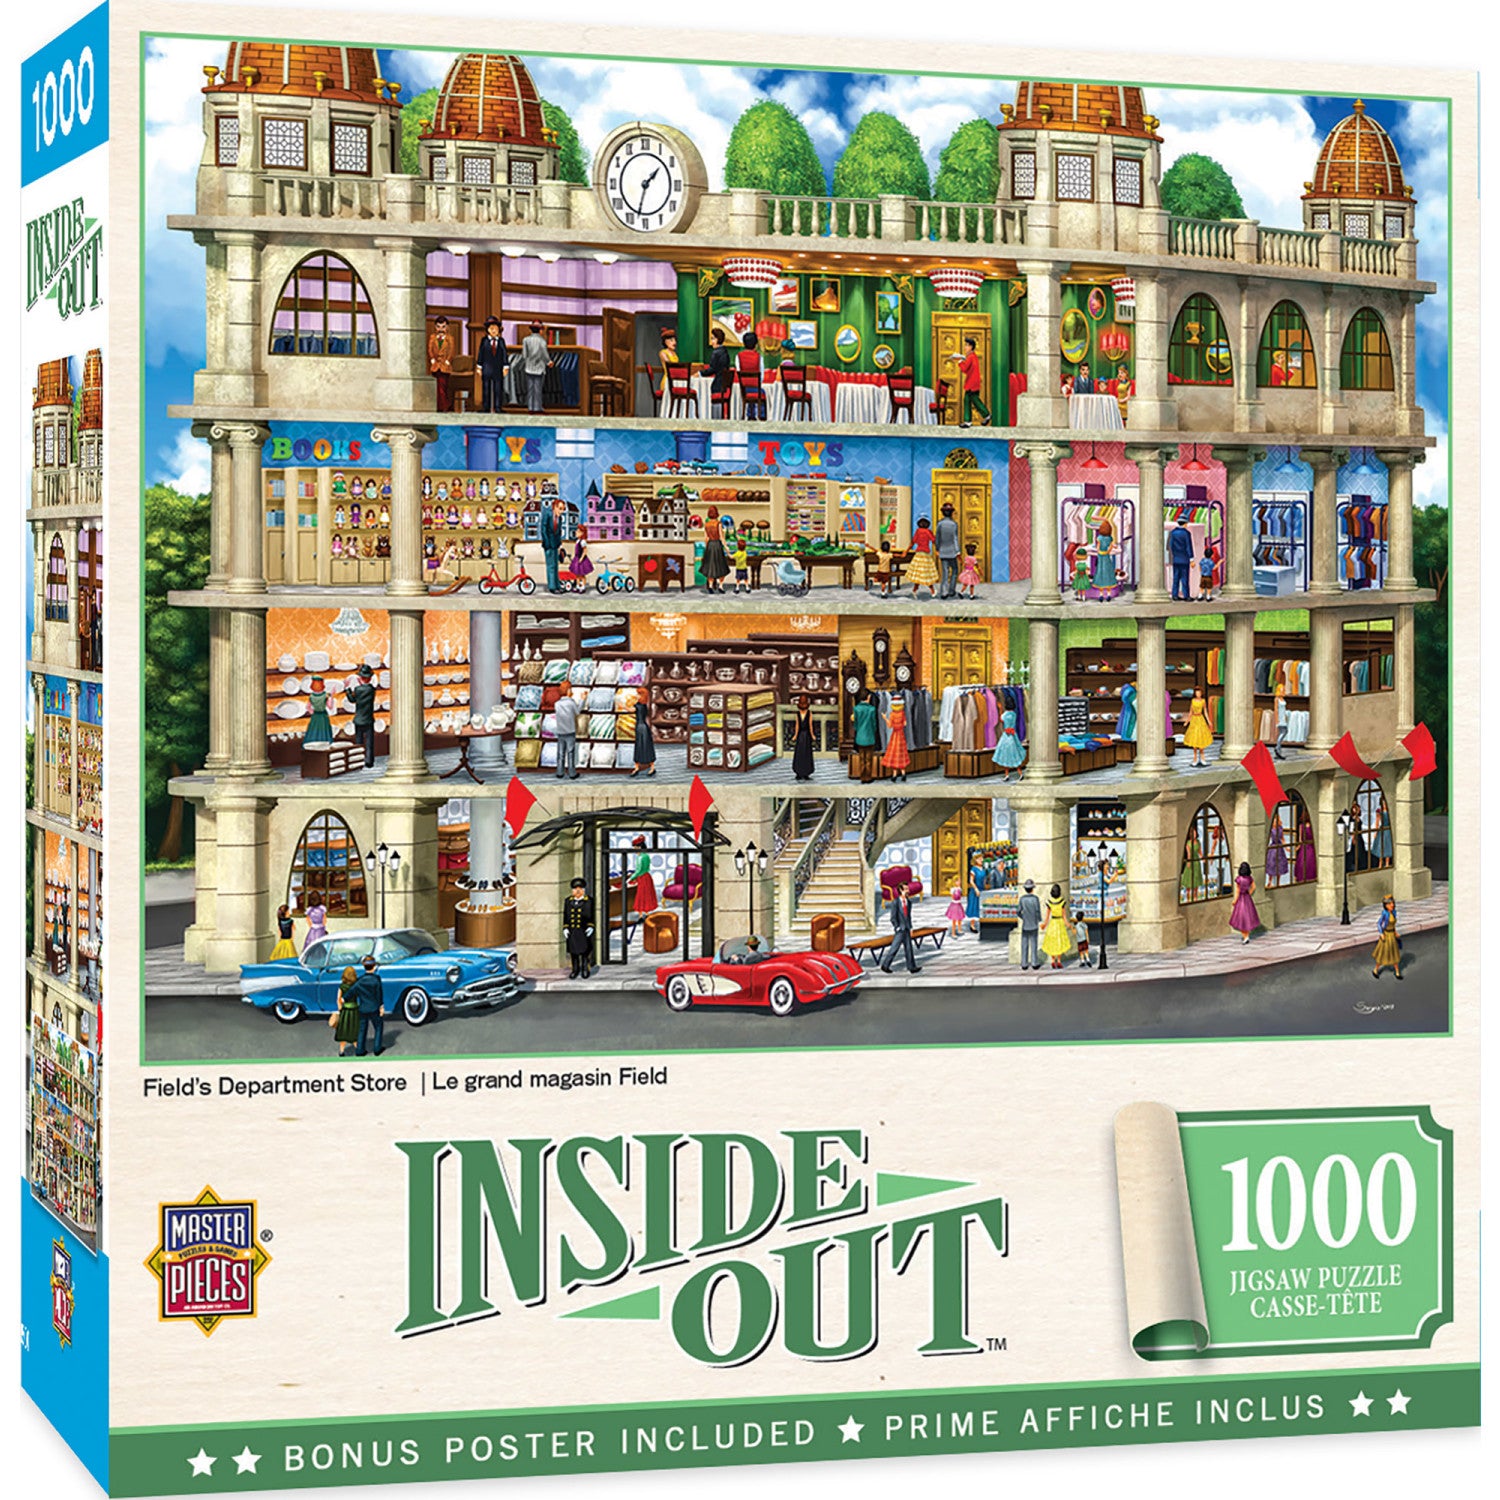 Inside Out - Field's Department Store 1000 Piece Jigsaw Puzzle